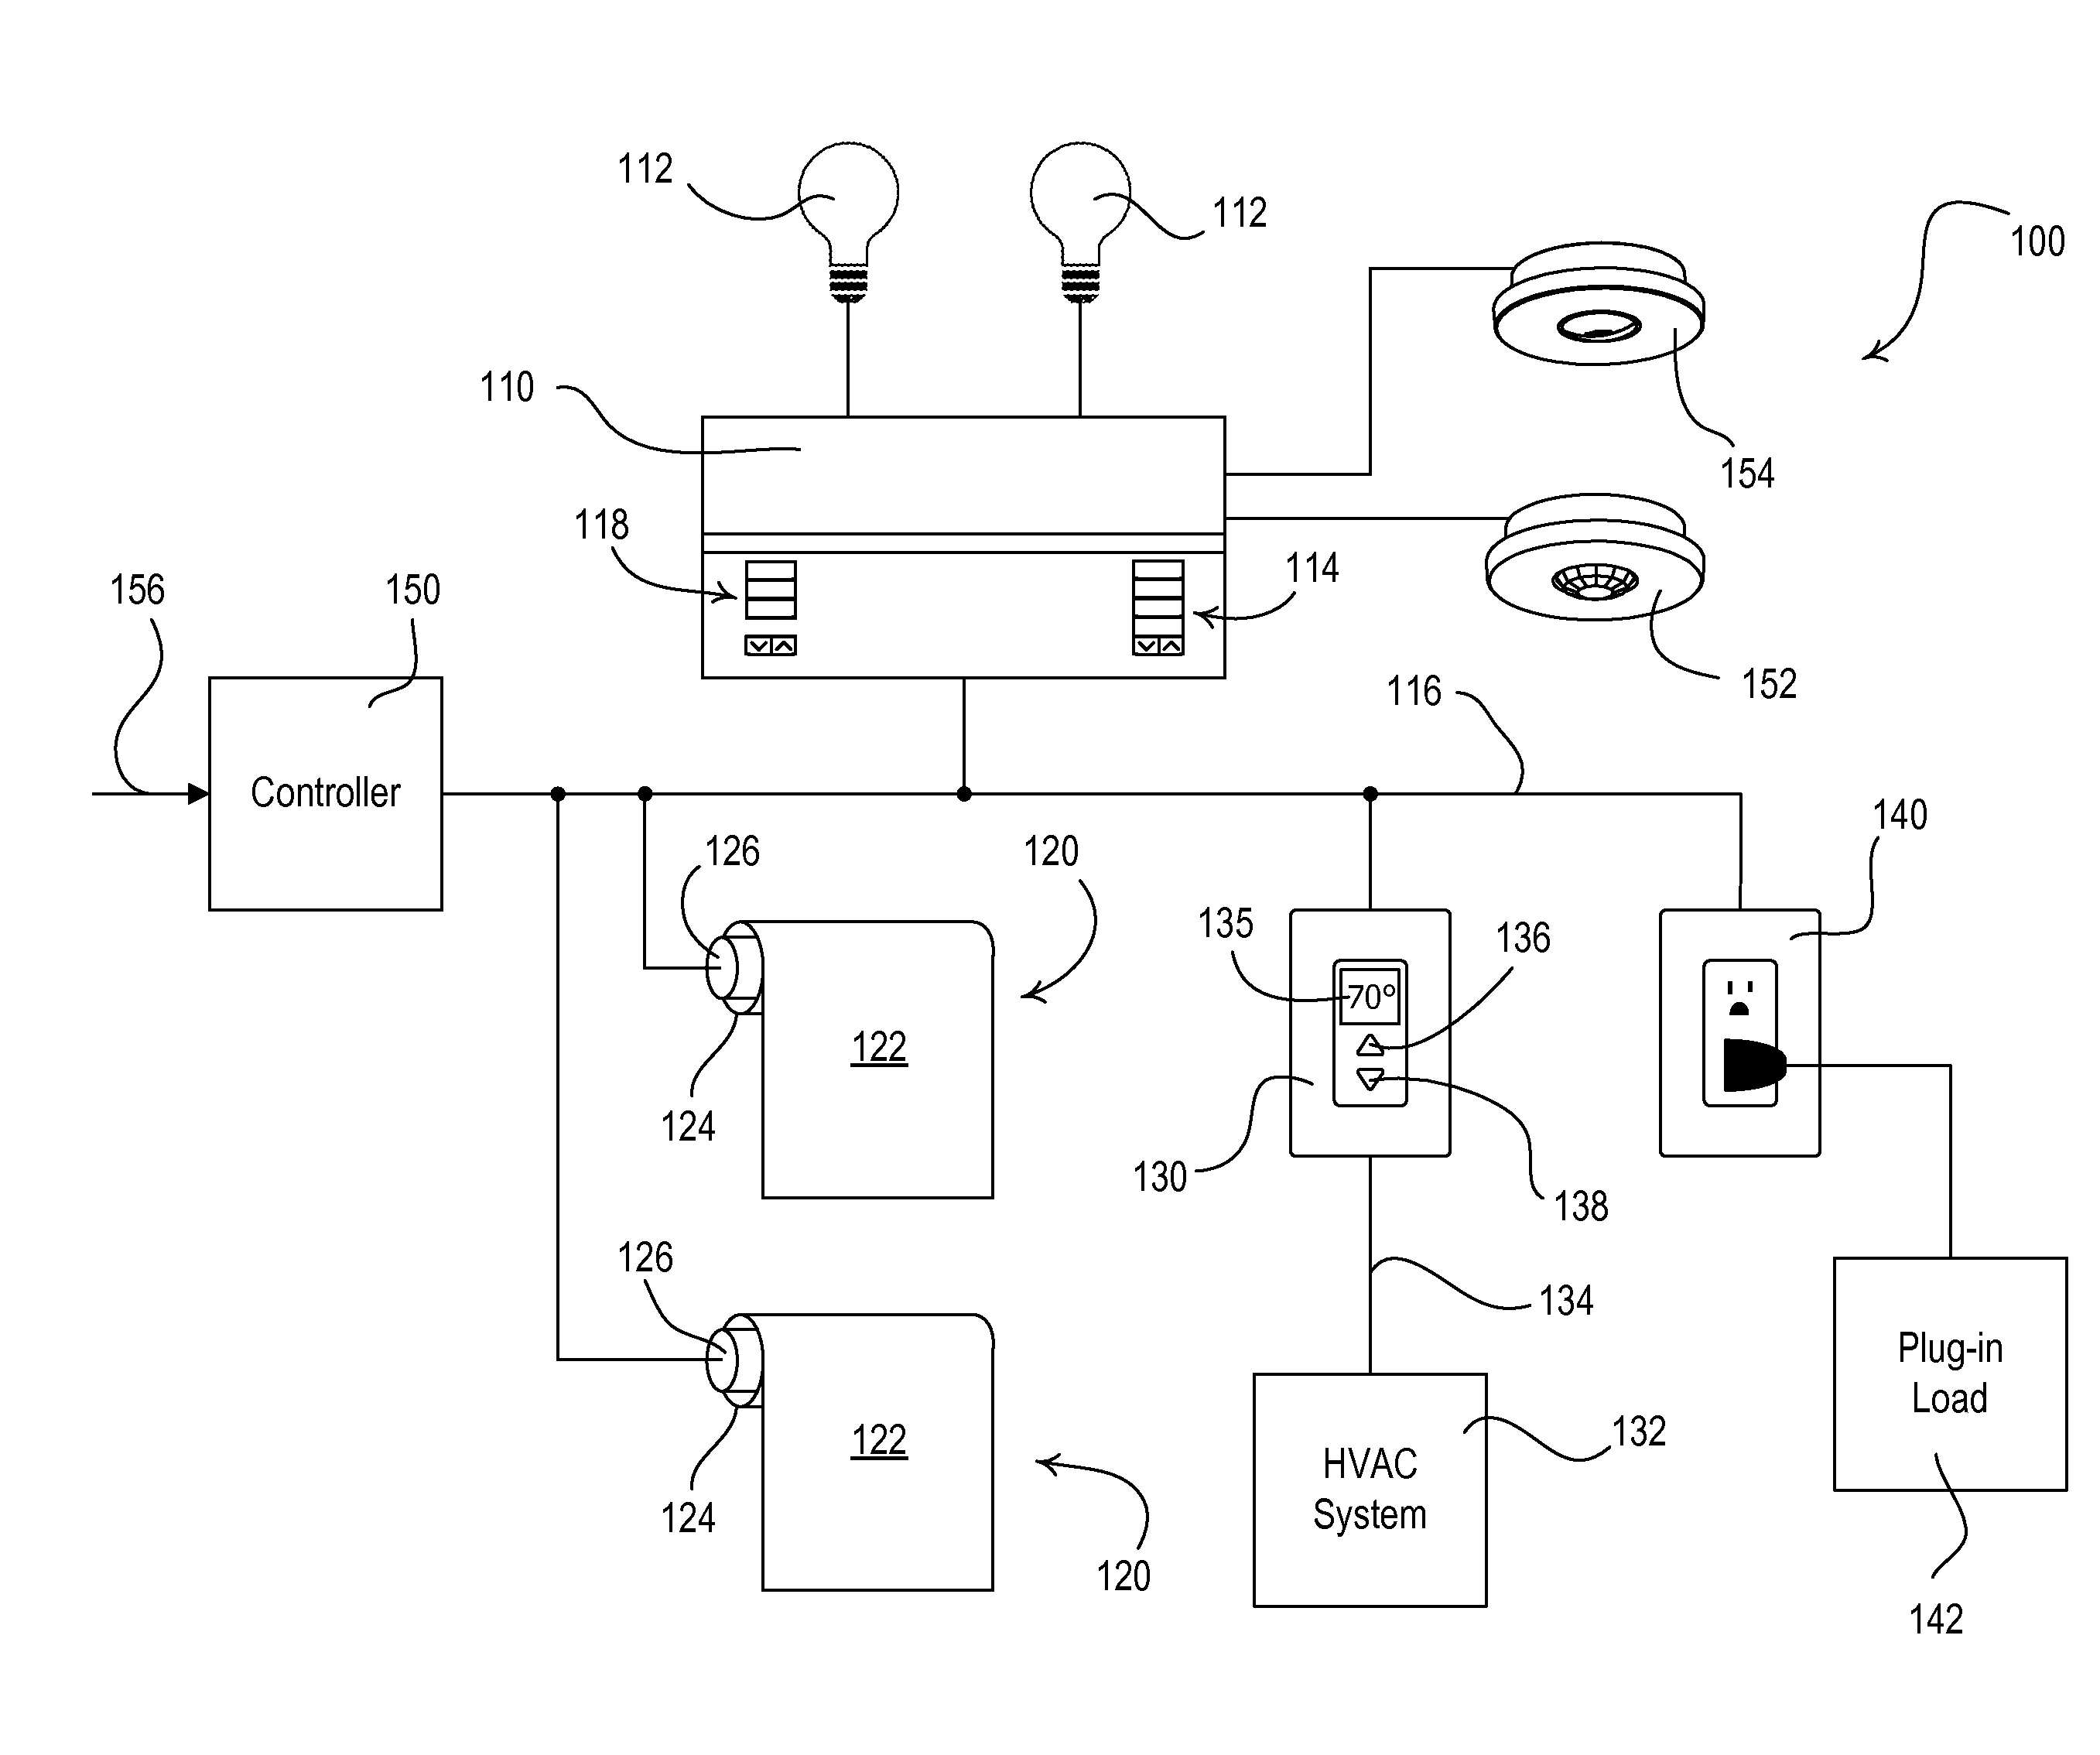 Wall-Mountable Temperature Control Device for a Load Control System Having an Energy Savings Mode